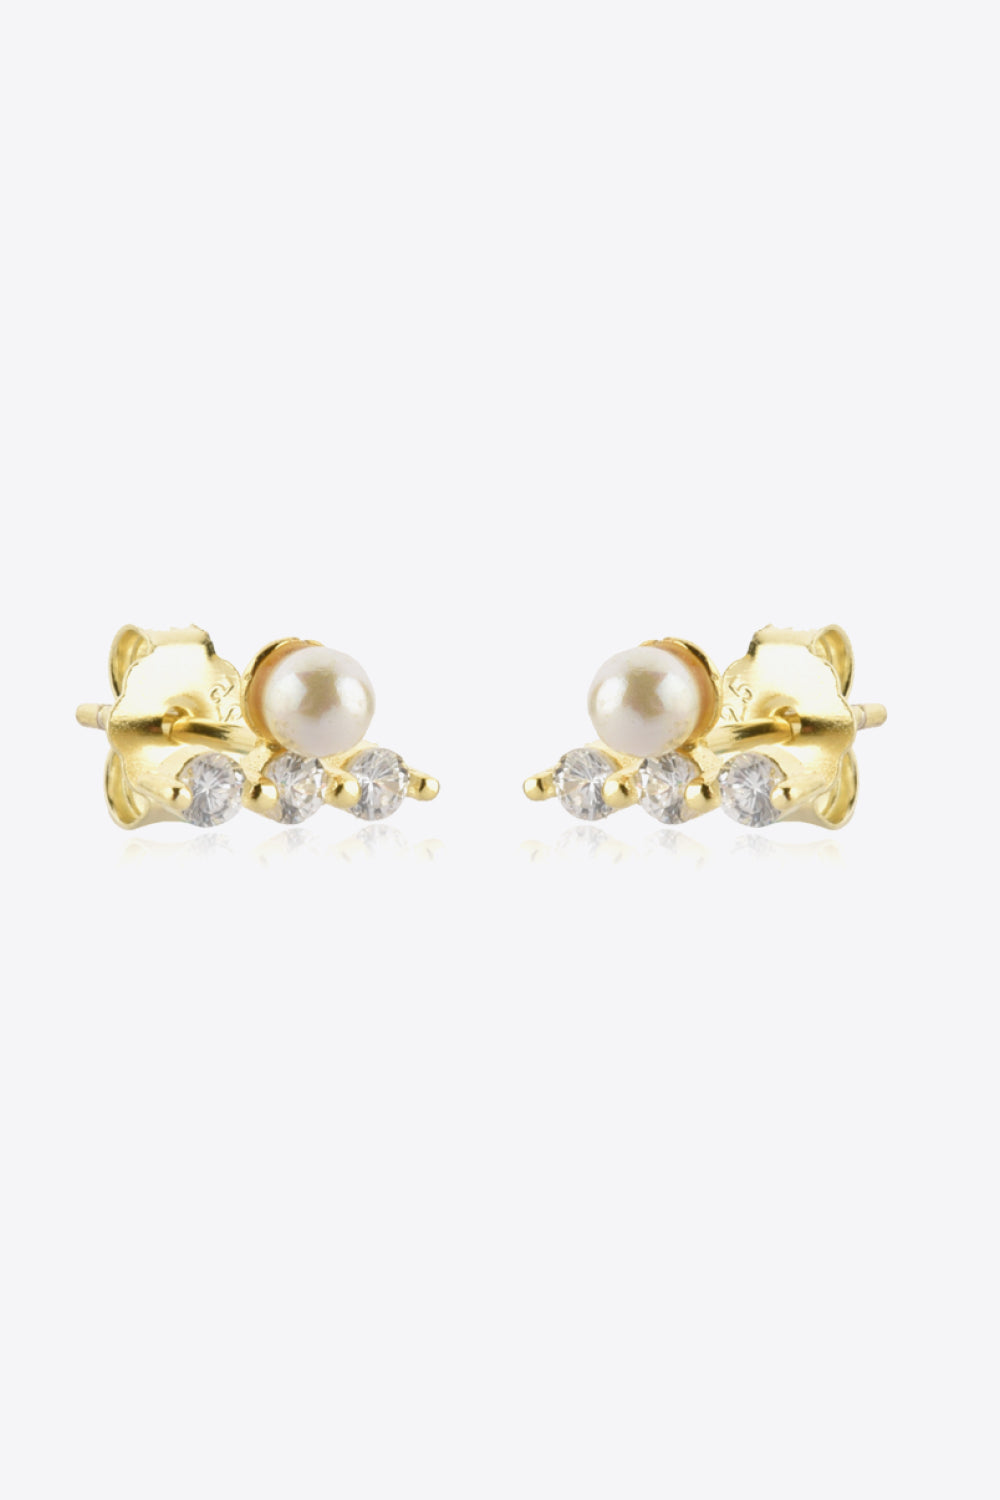 Zircon and Pearl 925 Sterling Silver Stud Earrings - Guy Christopher 